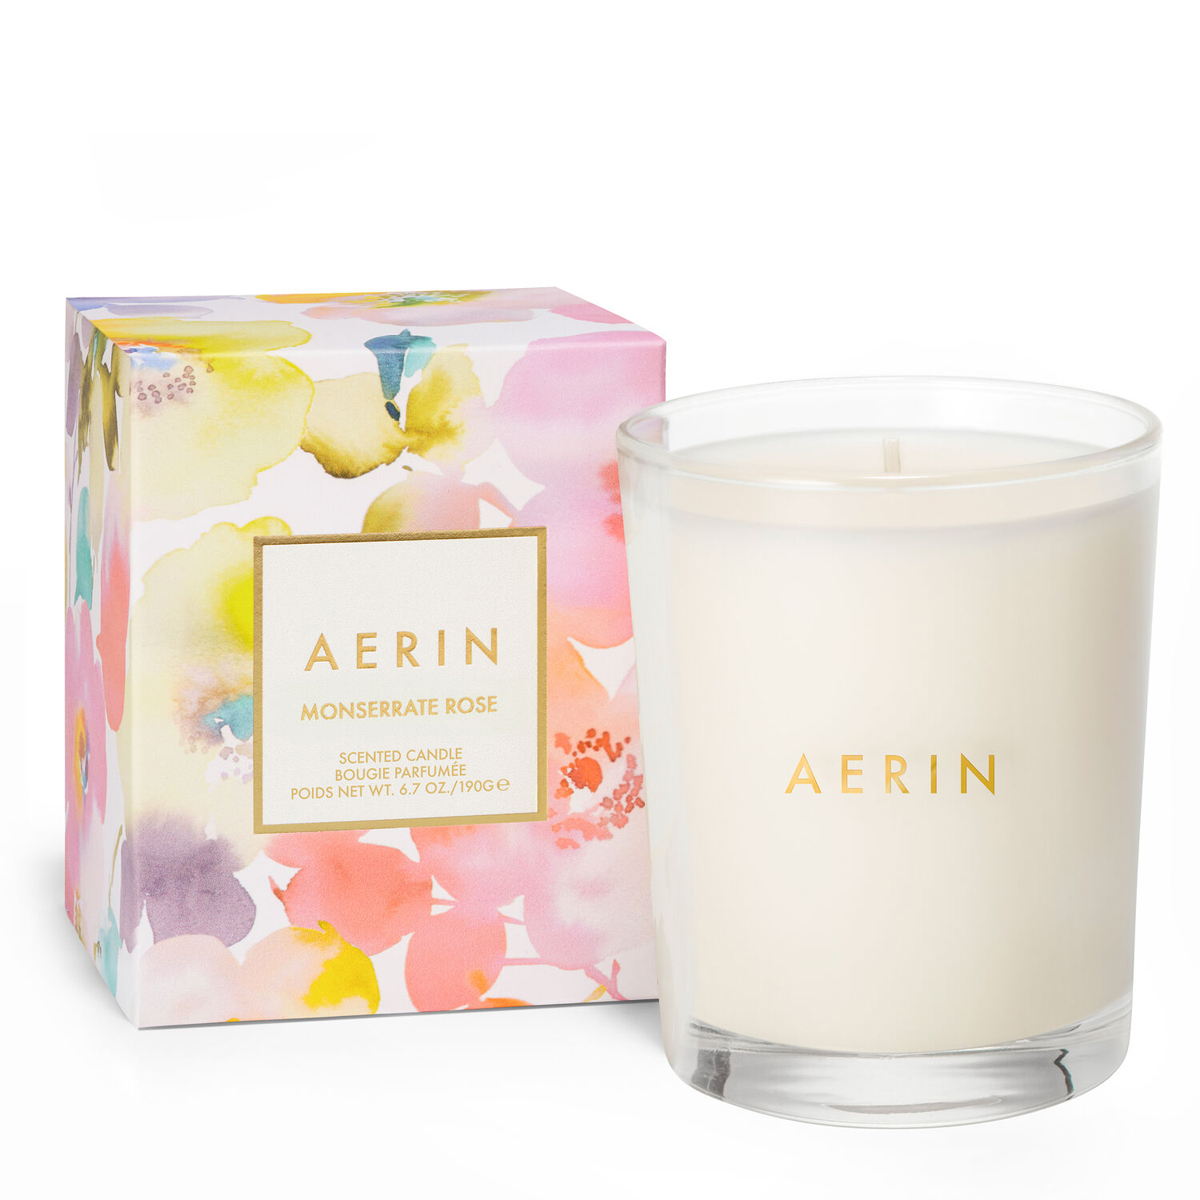 Aerin Monserrate Rose 6.7oz Candle